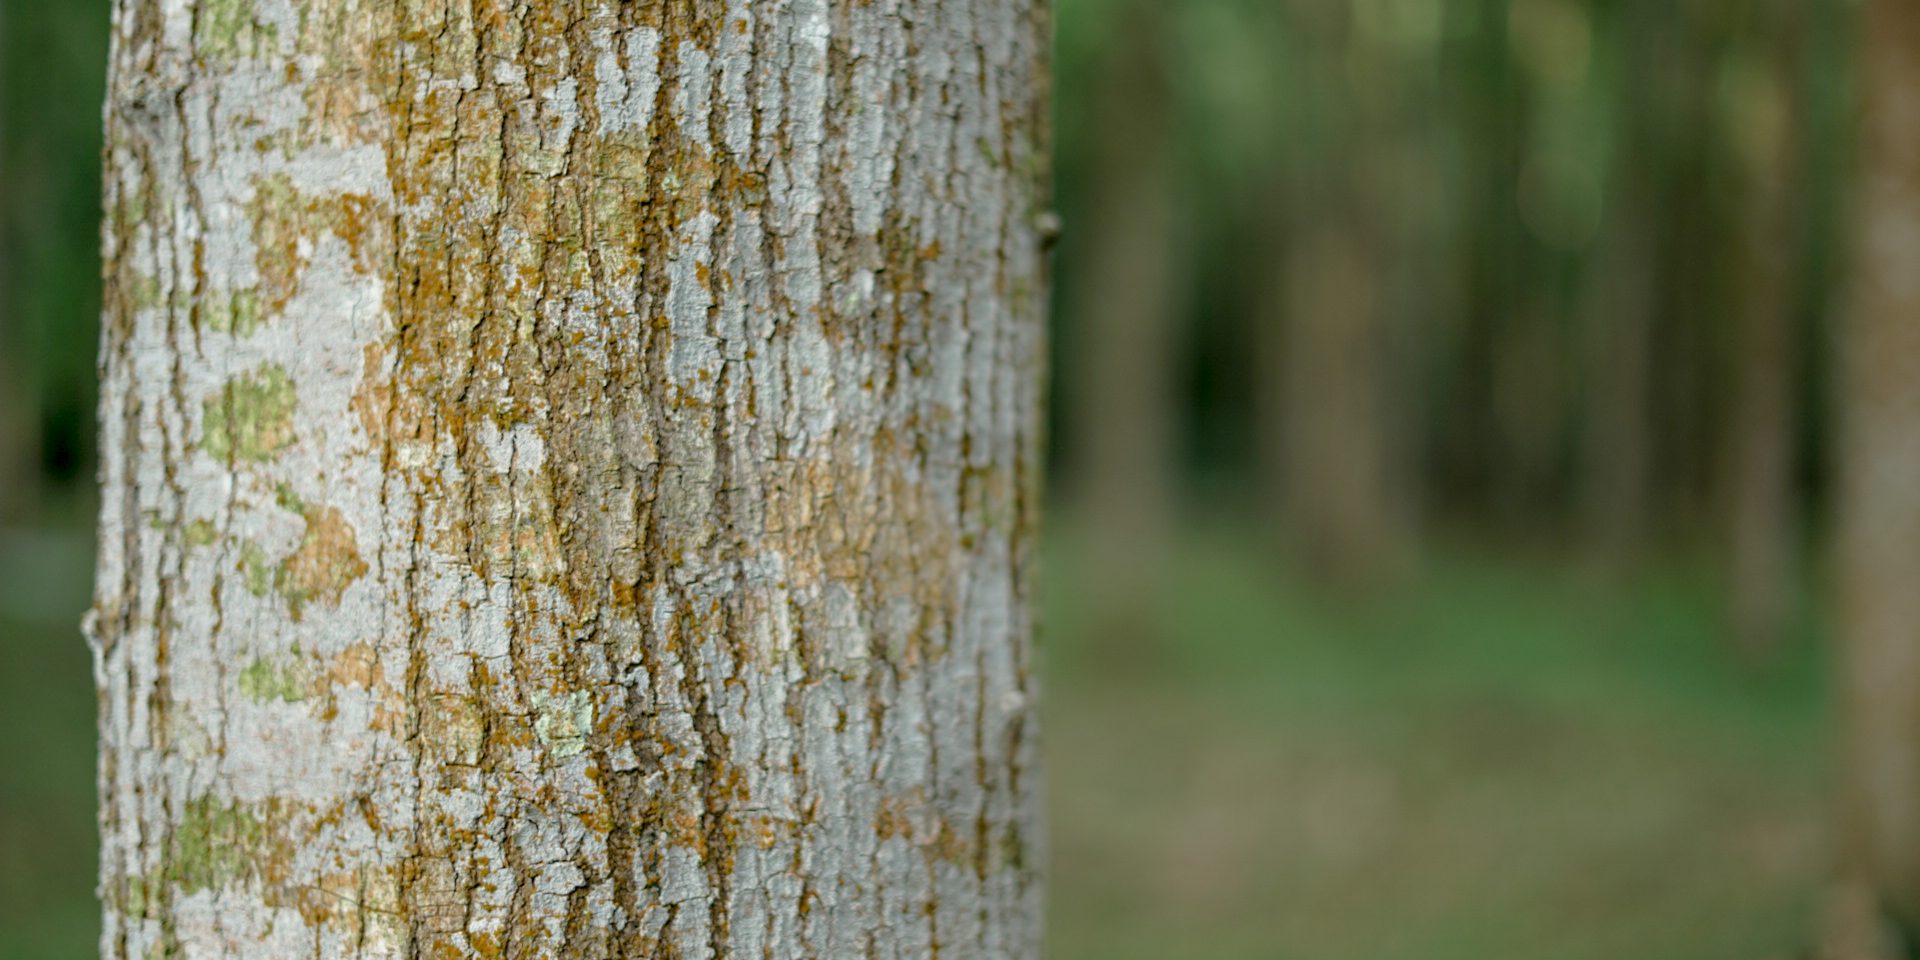 A focused view of a tree bark